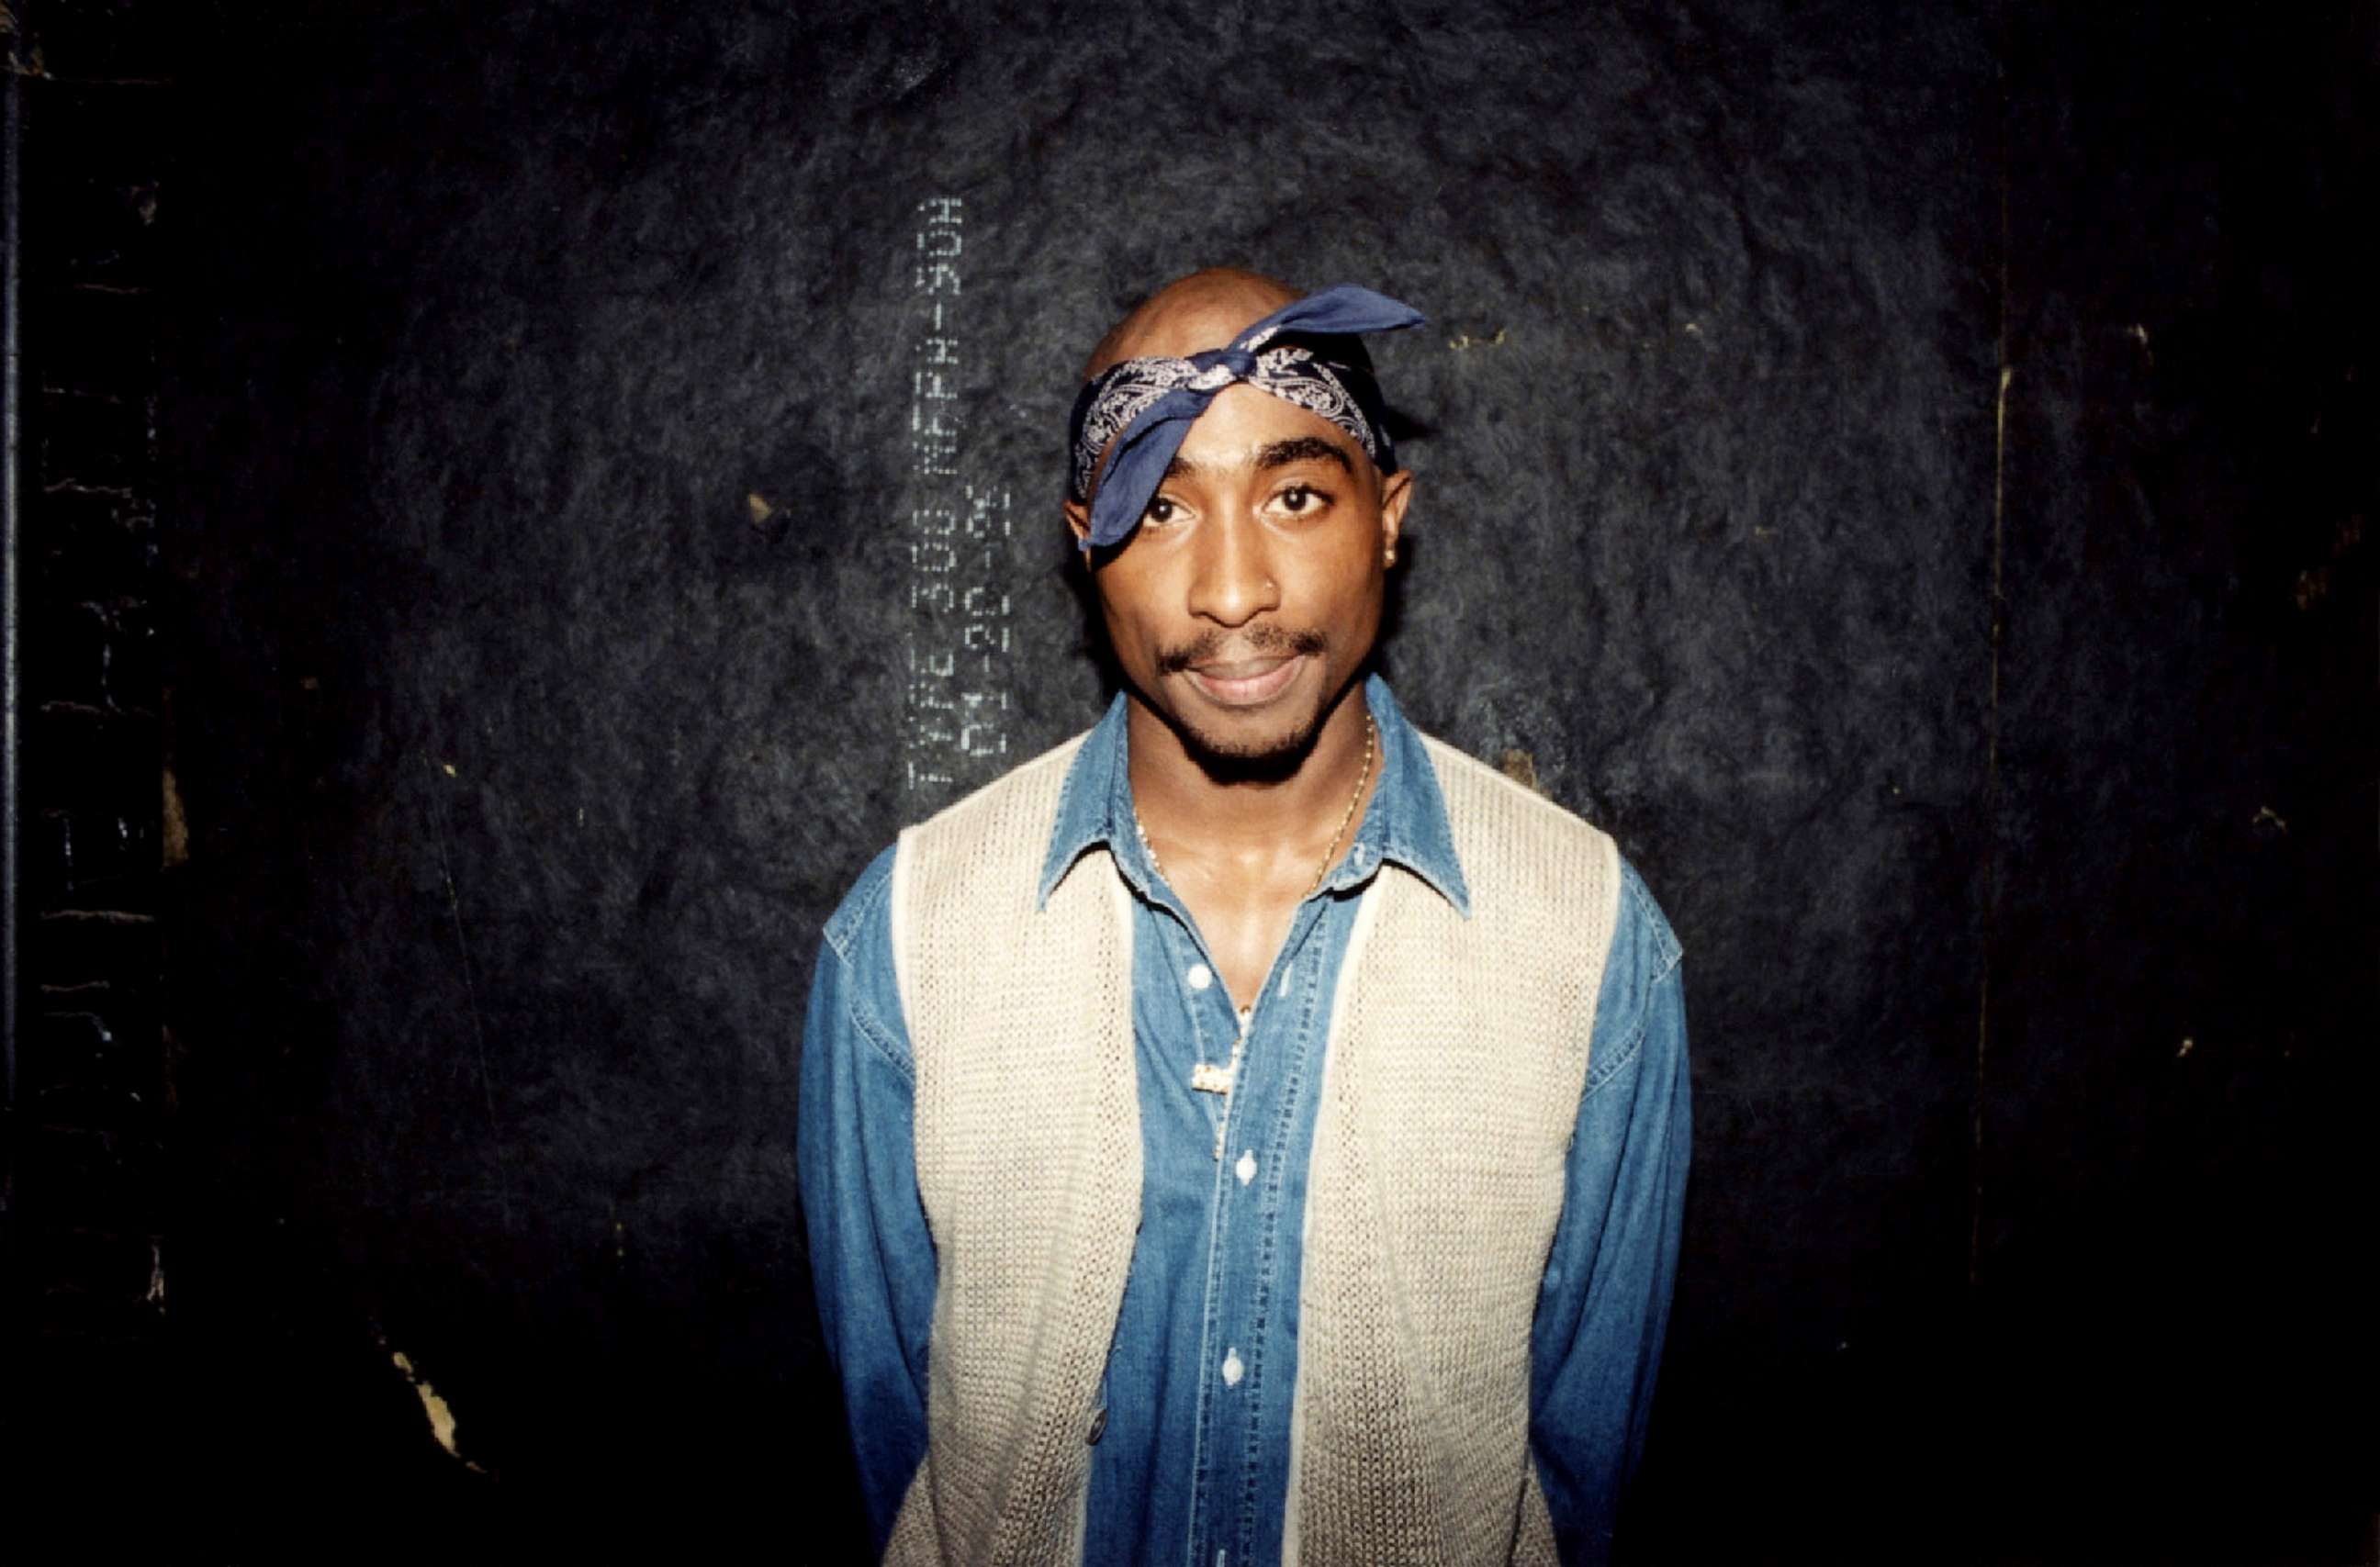 PHOTO: Rapper Tupac Shakur poses for photos backstage after his performance at the Regal Theater in Chicago, Illinois in March 1994.